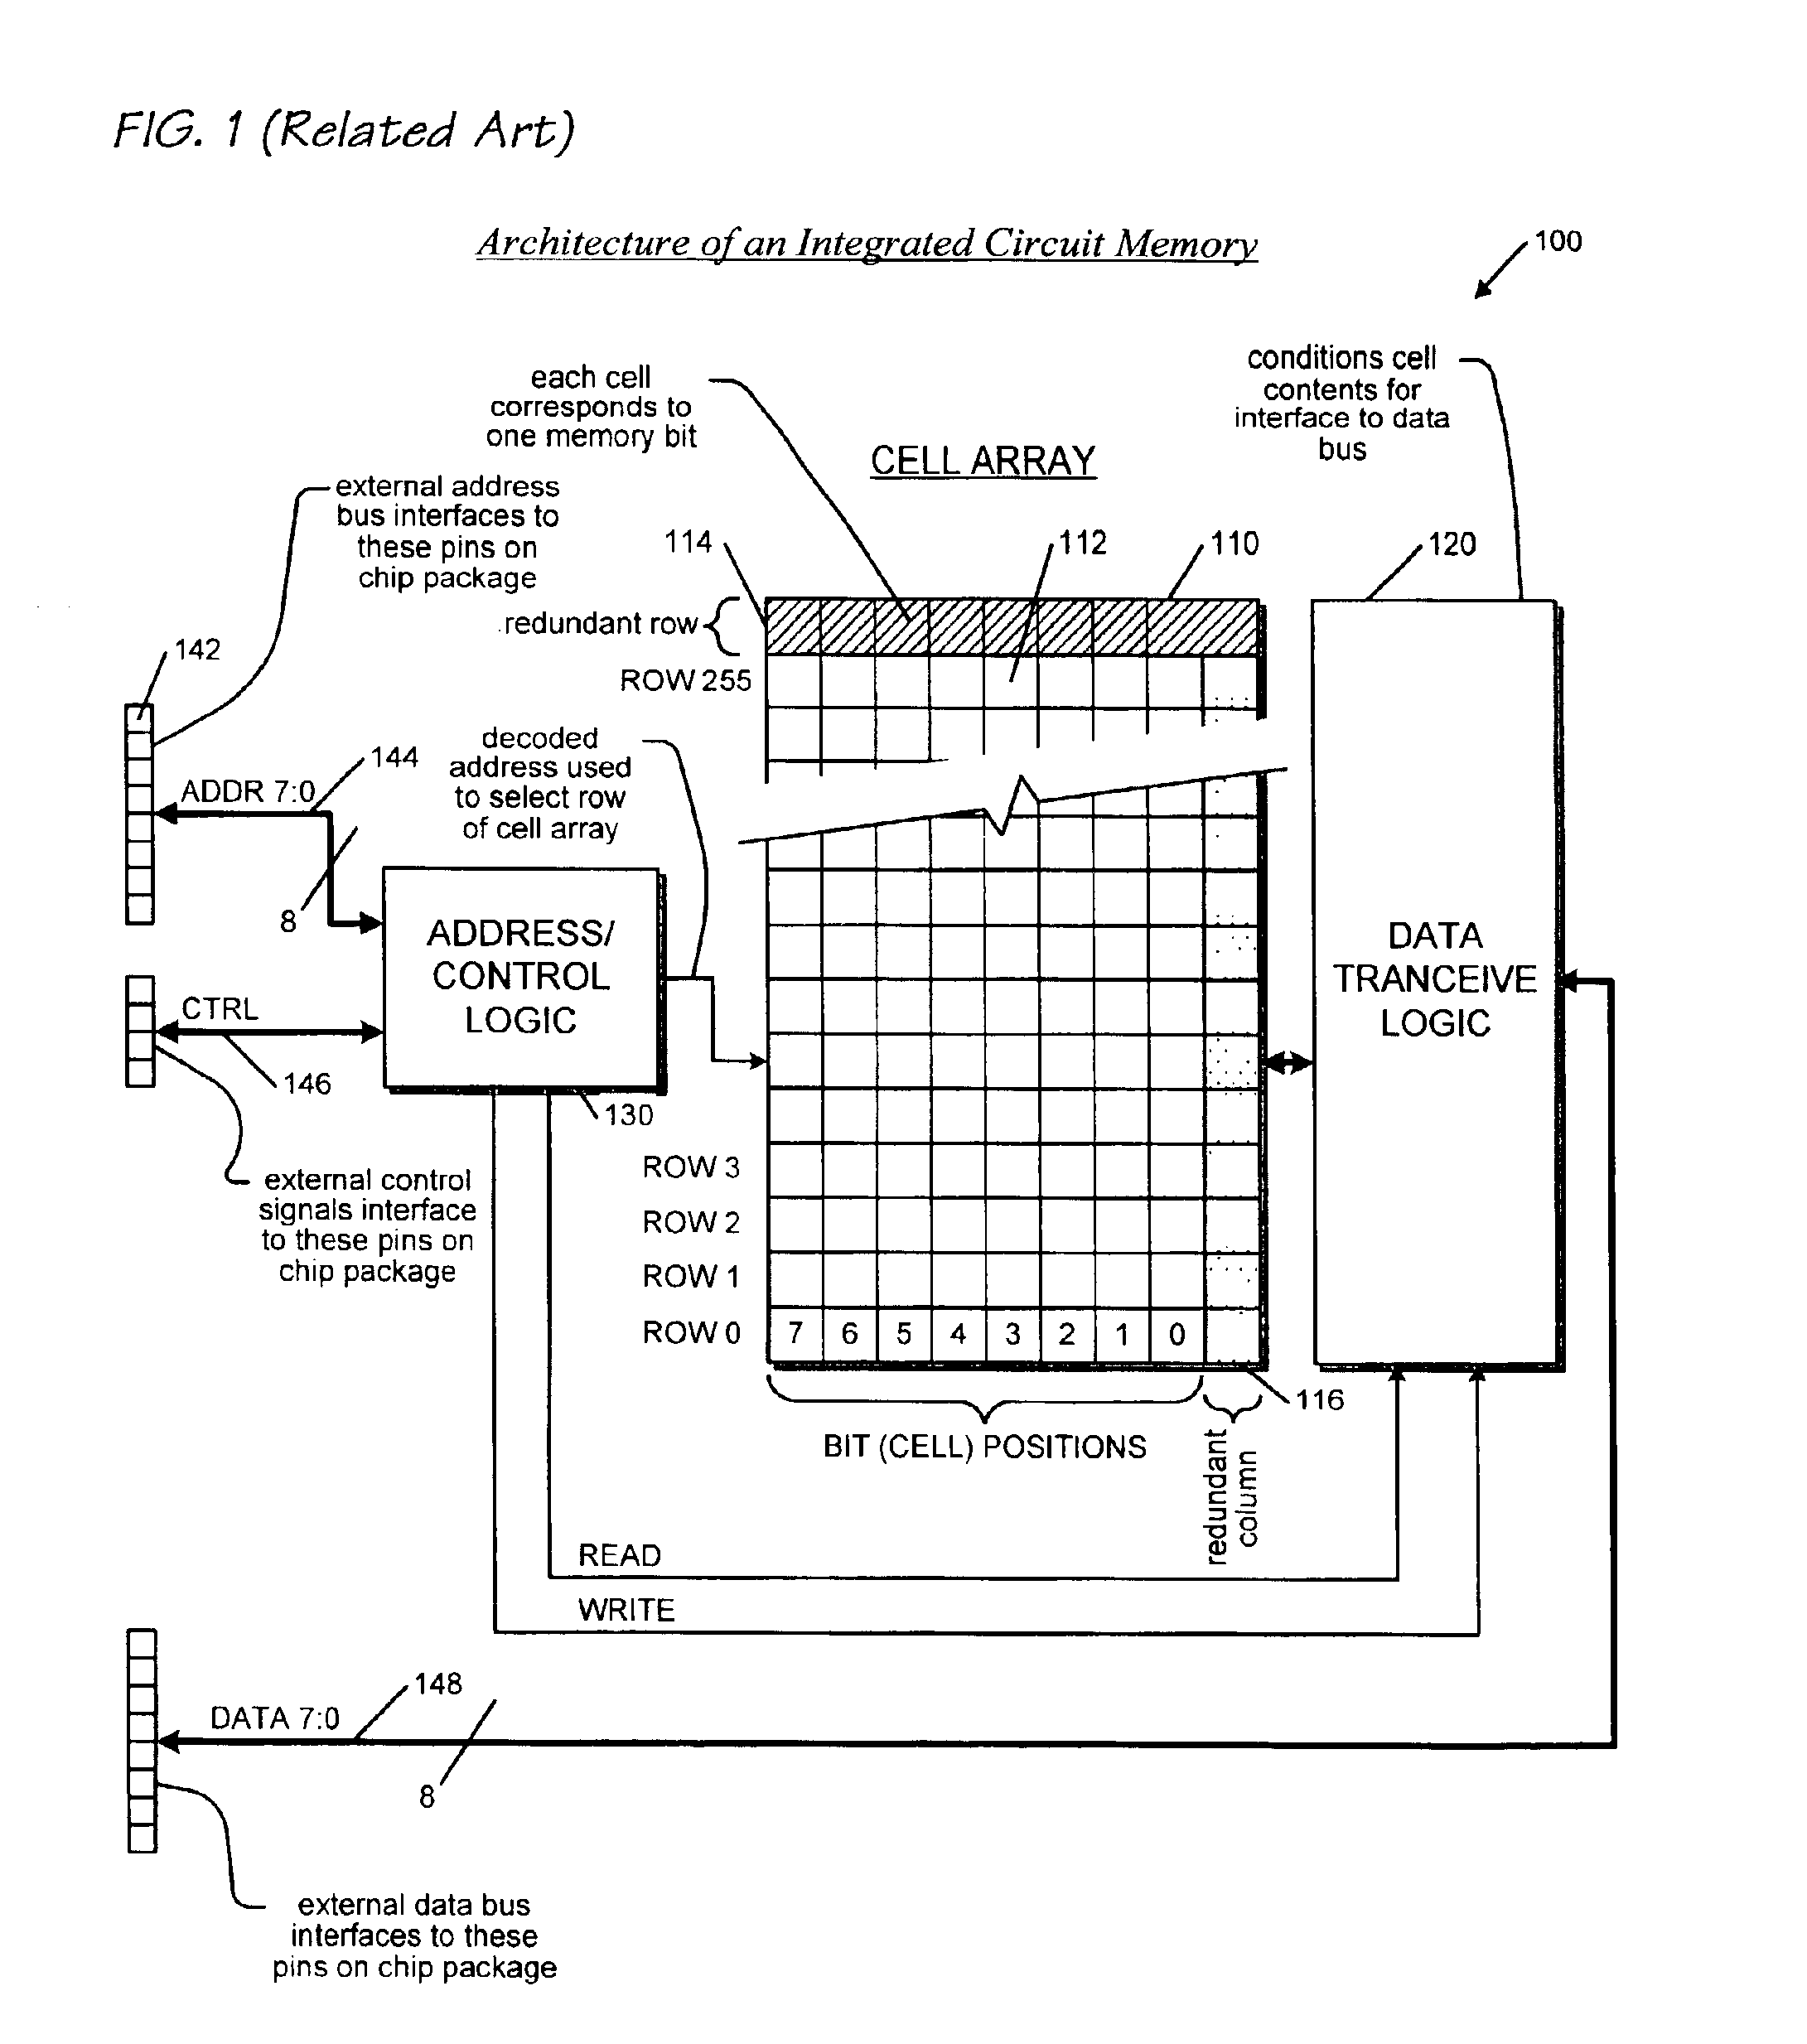 Apparatus and method for testing memory in a microprocessor